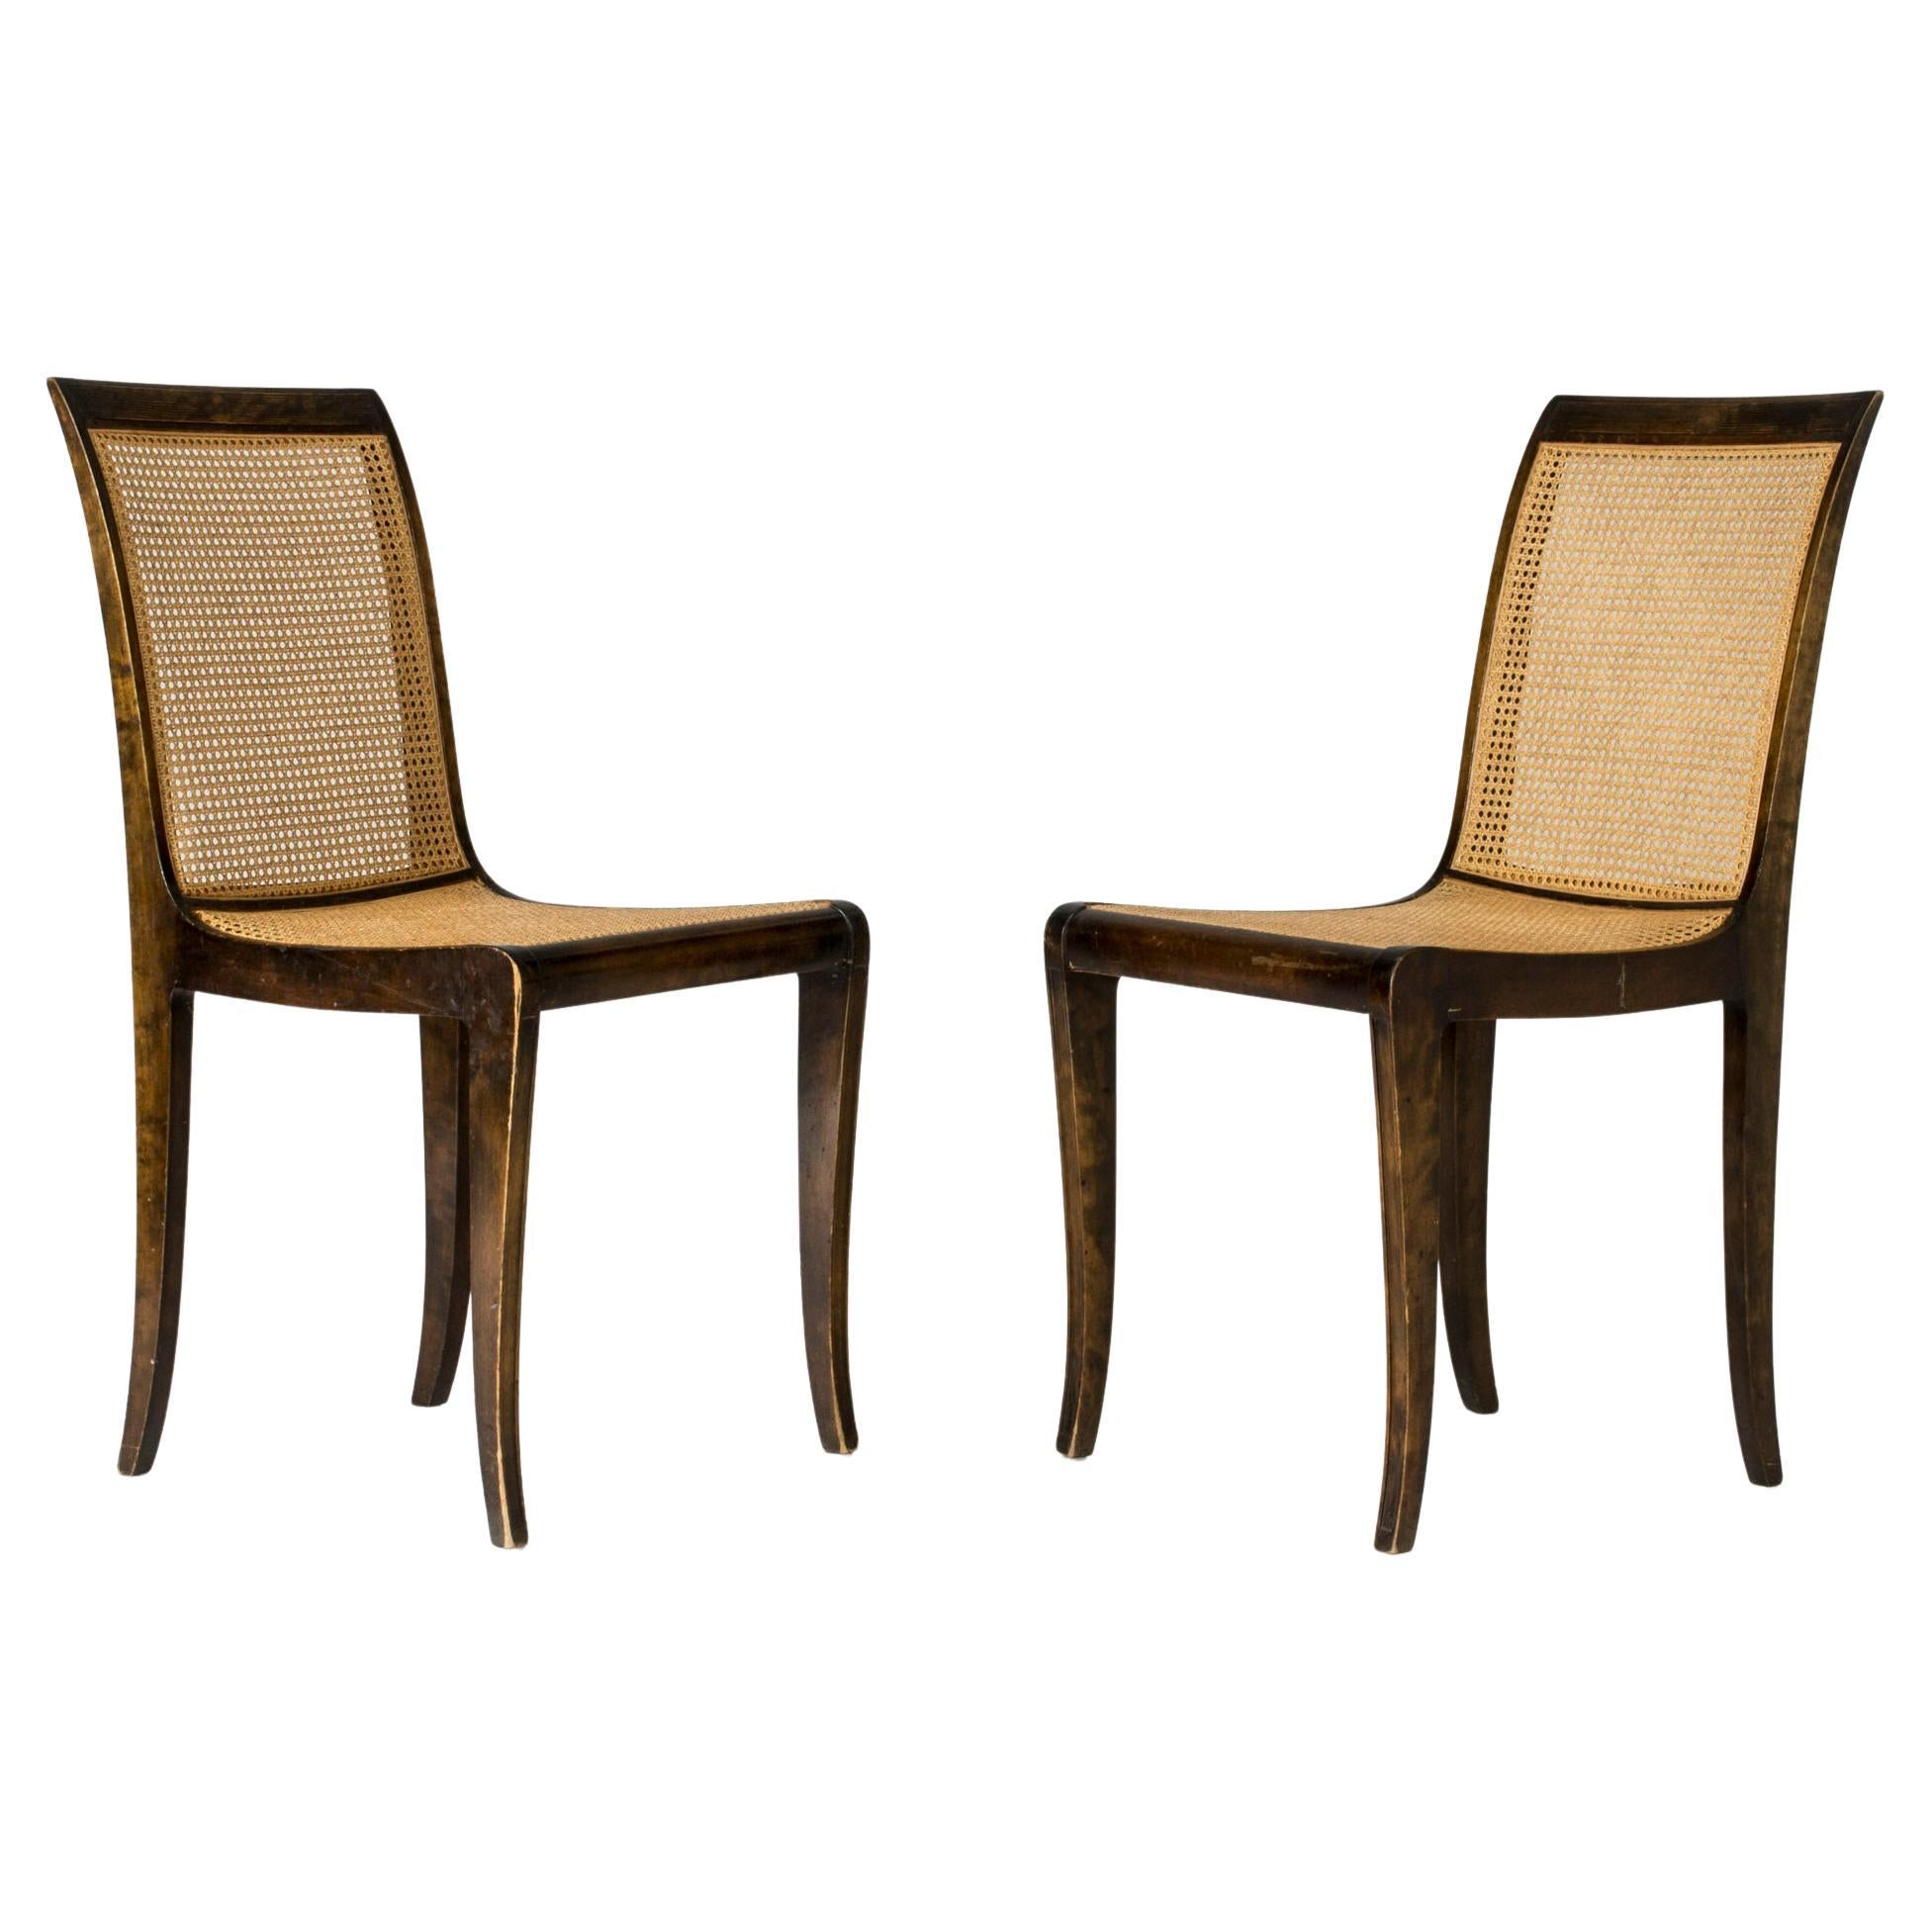 Pair of Side Chairs by Carl Malmsten, Sweden, 1930s